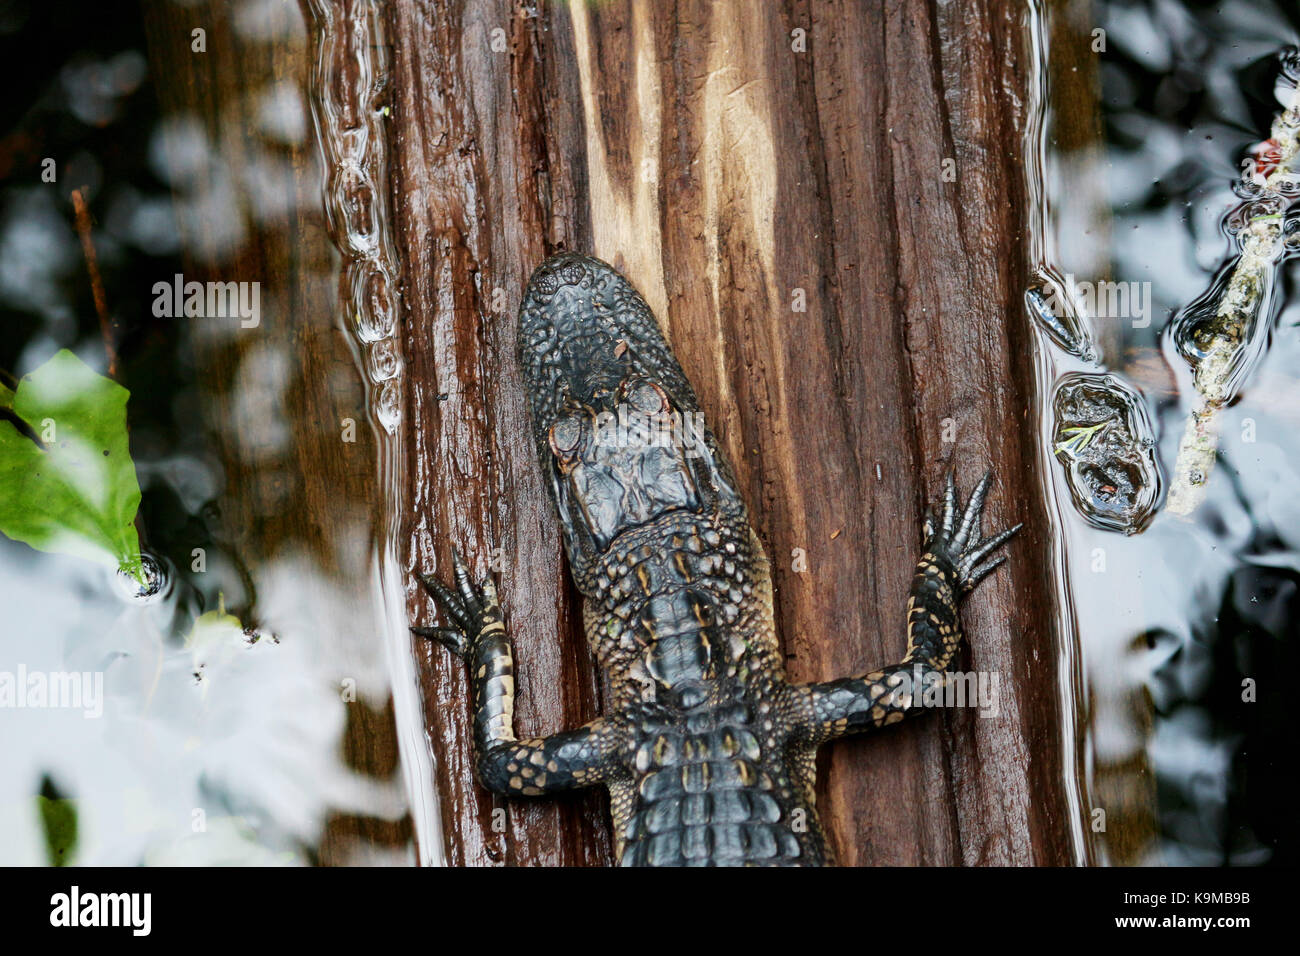 An alligator resting on a downed tree in the swampy lakes of Florida Stock Photo